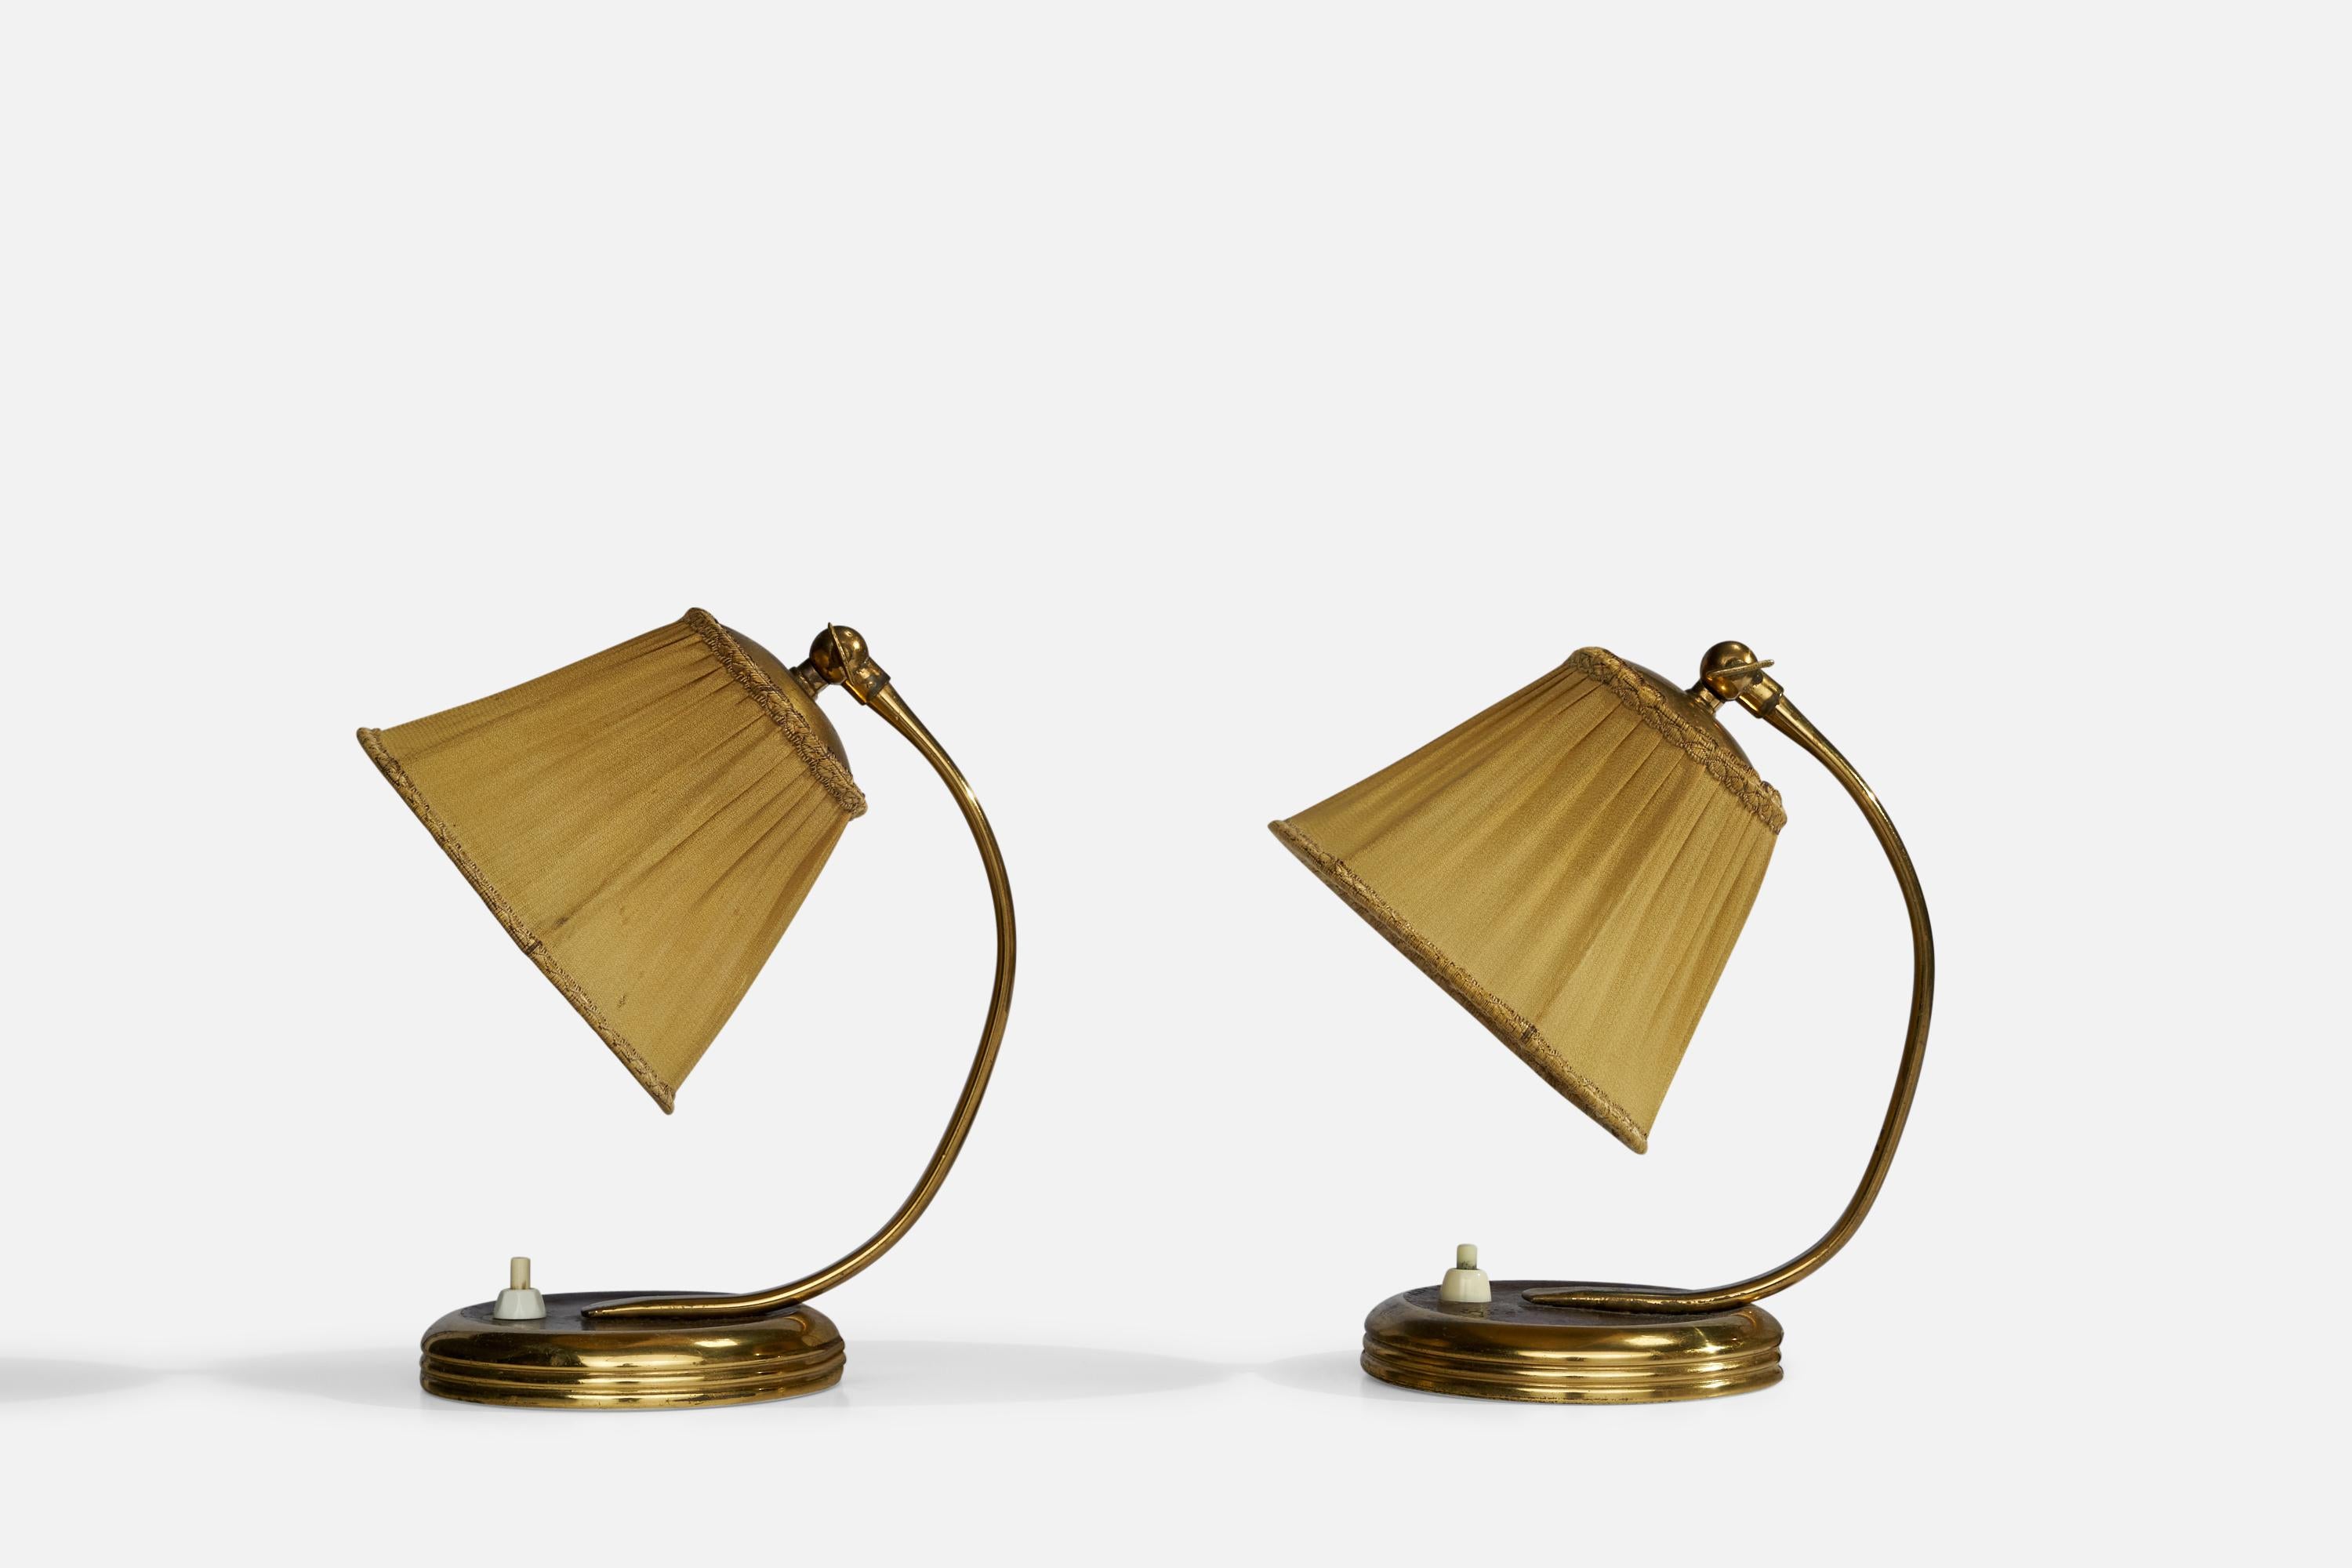 A pair of brass, brown-lacquered metal and beige fabric table lamps or wall lights designed and produced in Sweden, c. 1940s.

Overall Dimensions (inches): 8.5” H x 5.5” W x 6.75” D
Stated dimensions include shade.
Bulb Specifications: E-26